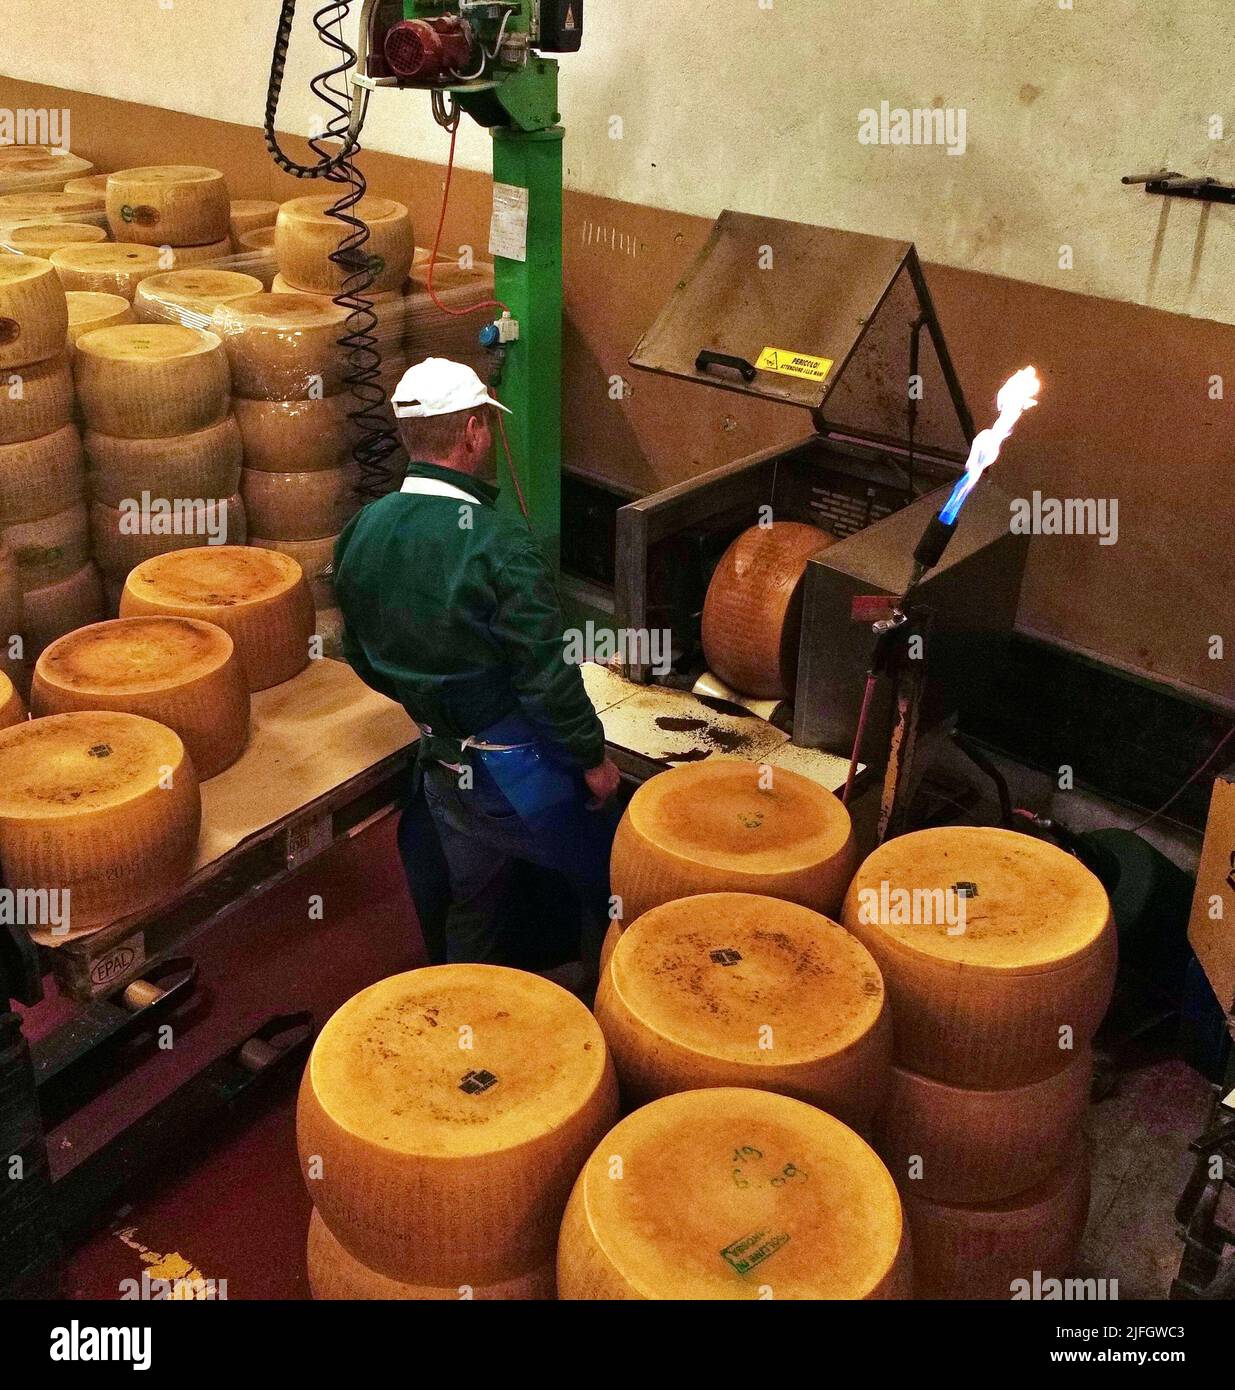 https://c8.alamy.com/comp/2JFGWC3/thousands-of-forms-of-parmigiano-reggiano-in-the-largest-parmesan-cheese-storage-store-near-montecavolo-reggio-emilia-italy-2JFGWC3.jpg